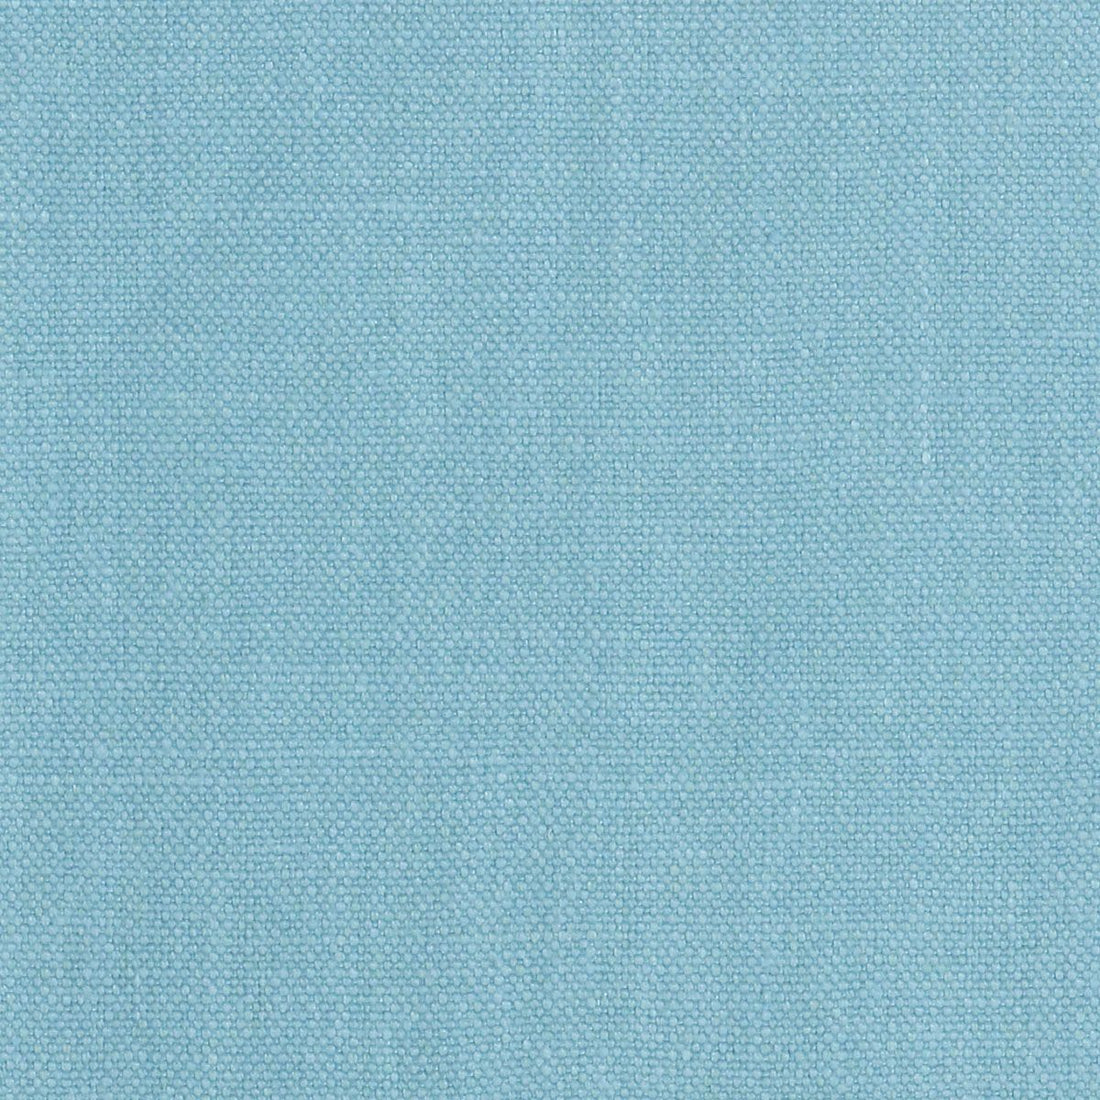 Outdoor Linen fabric in turquoise color - pattern number L2 9954Q305 - by Scalamandre in the Old World Weavers collection